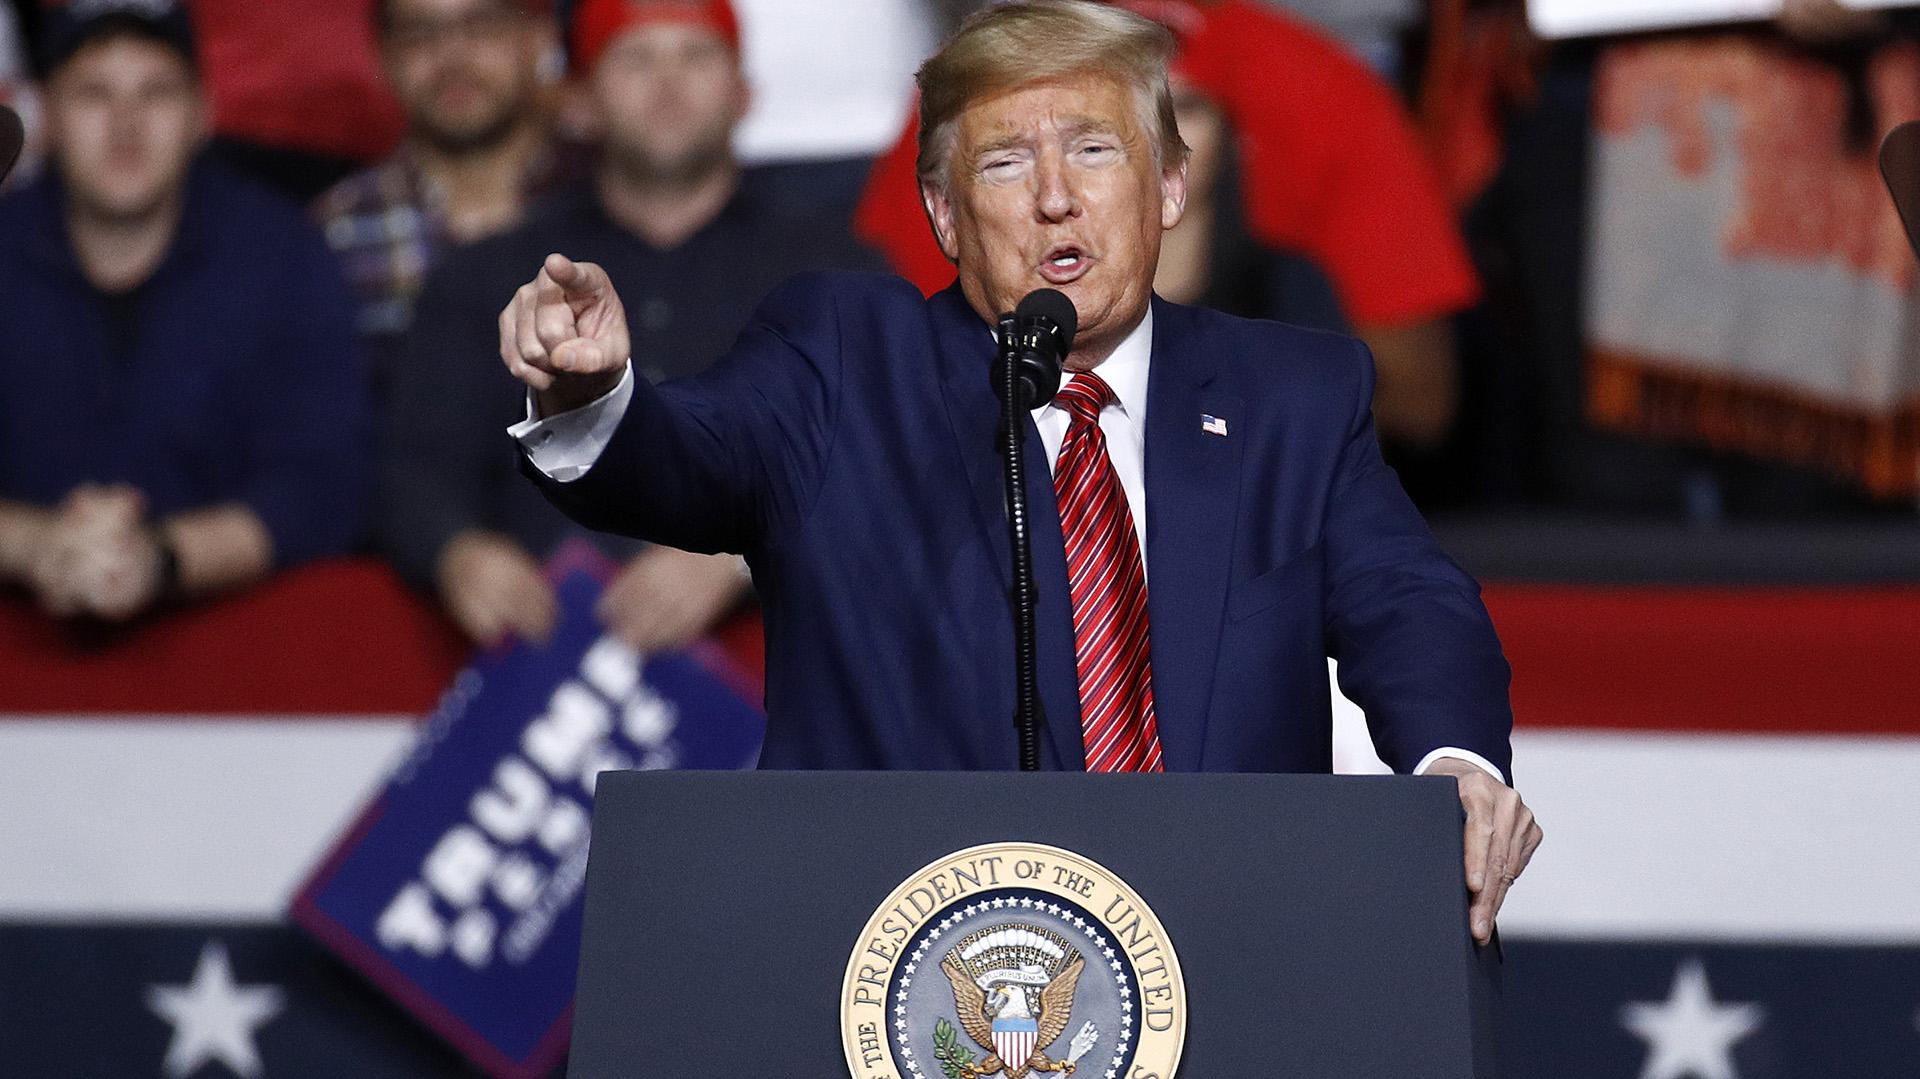 In this Friday, Feb. 28, 2020, file photo, President Donald Trump speaks during a campaign rally, in North Charleston, S.C. (AP Photo / Patrick Semansky, File)